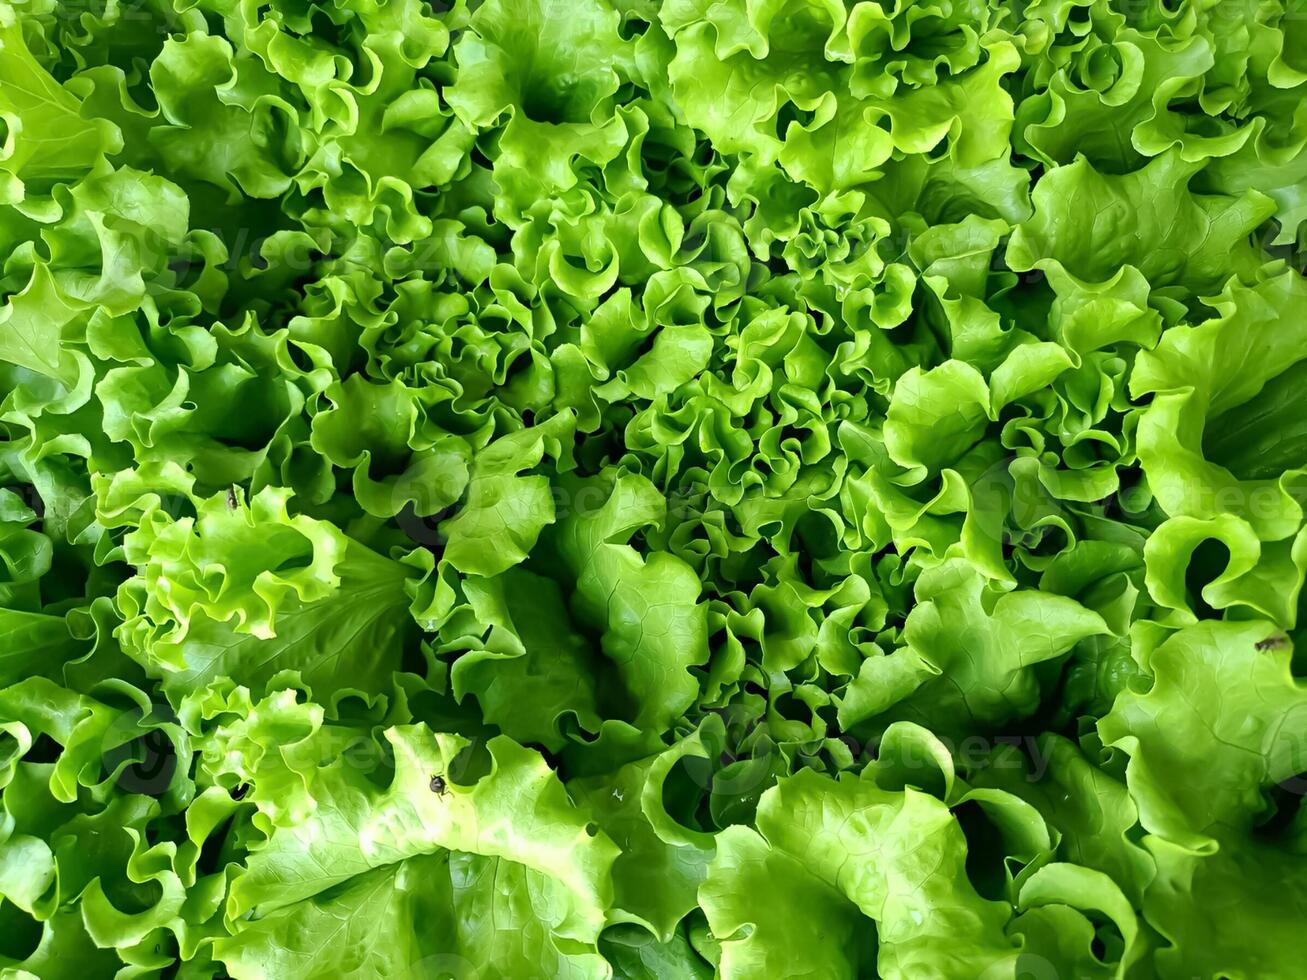 Fresh green mustard greens with their seductive leaf details and fresh appearance create health and nutrition. Suitable for use related to food and a healthy lifestyle. photo